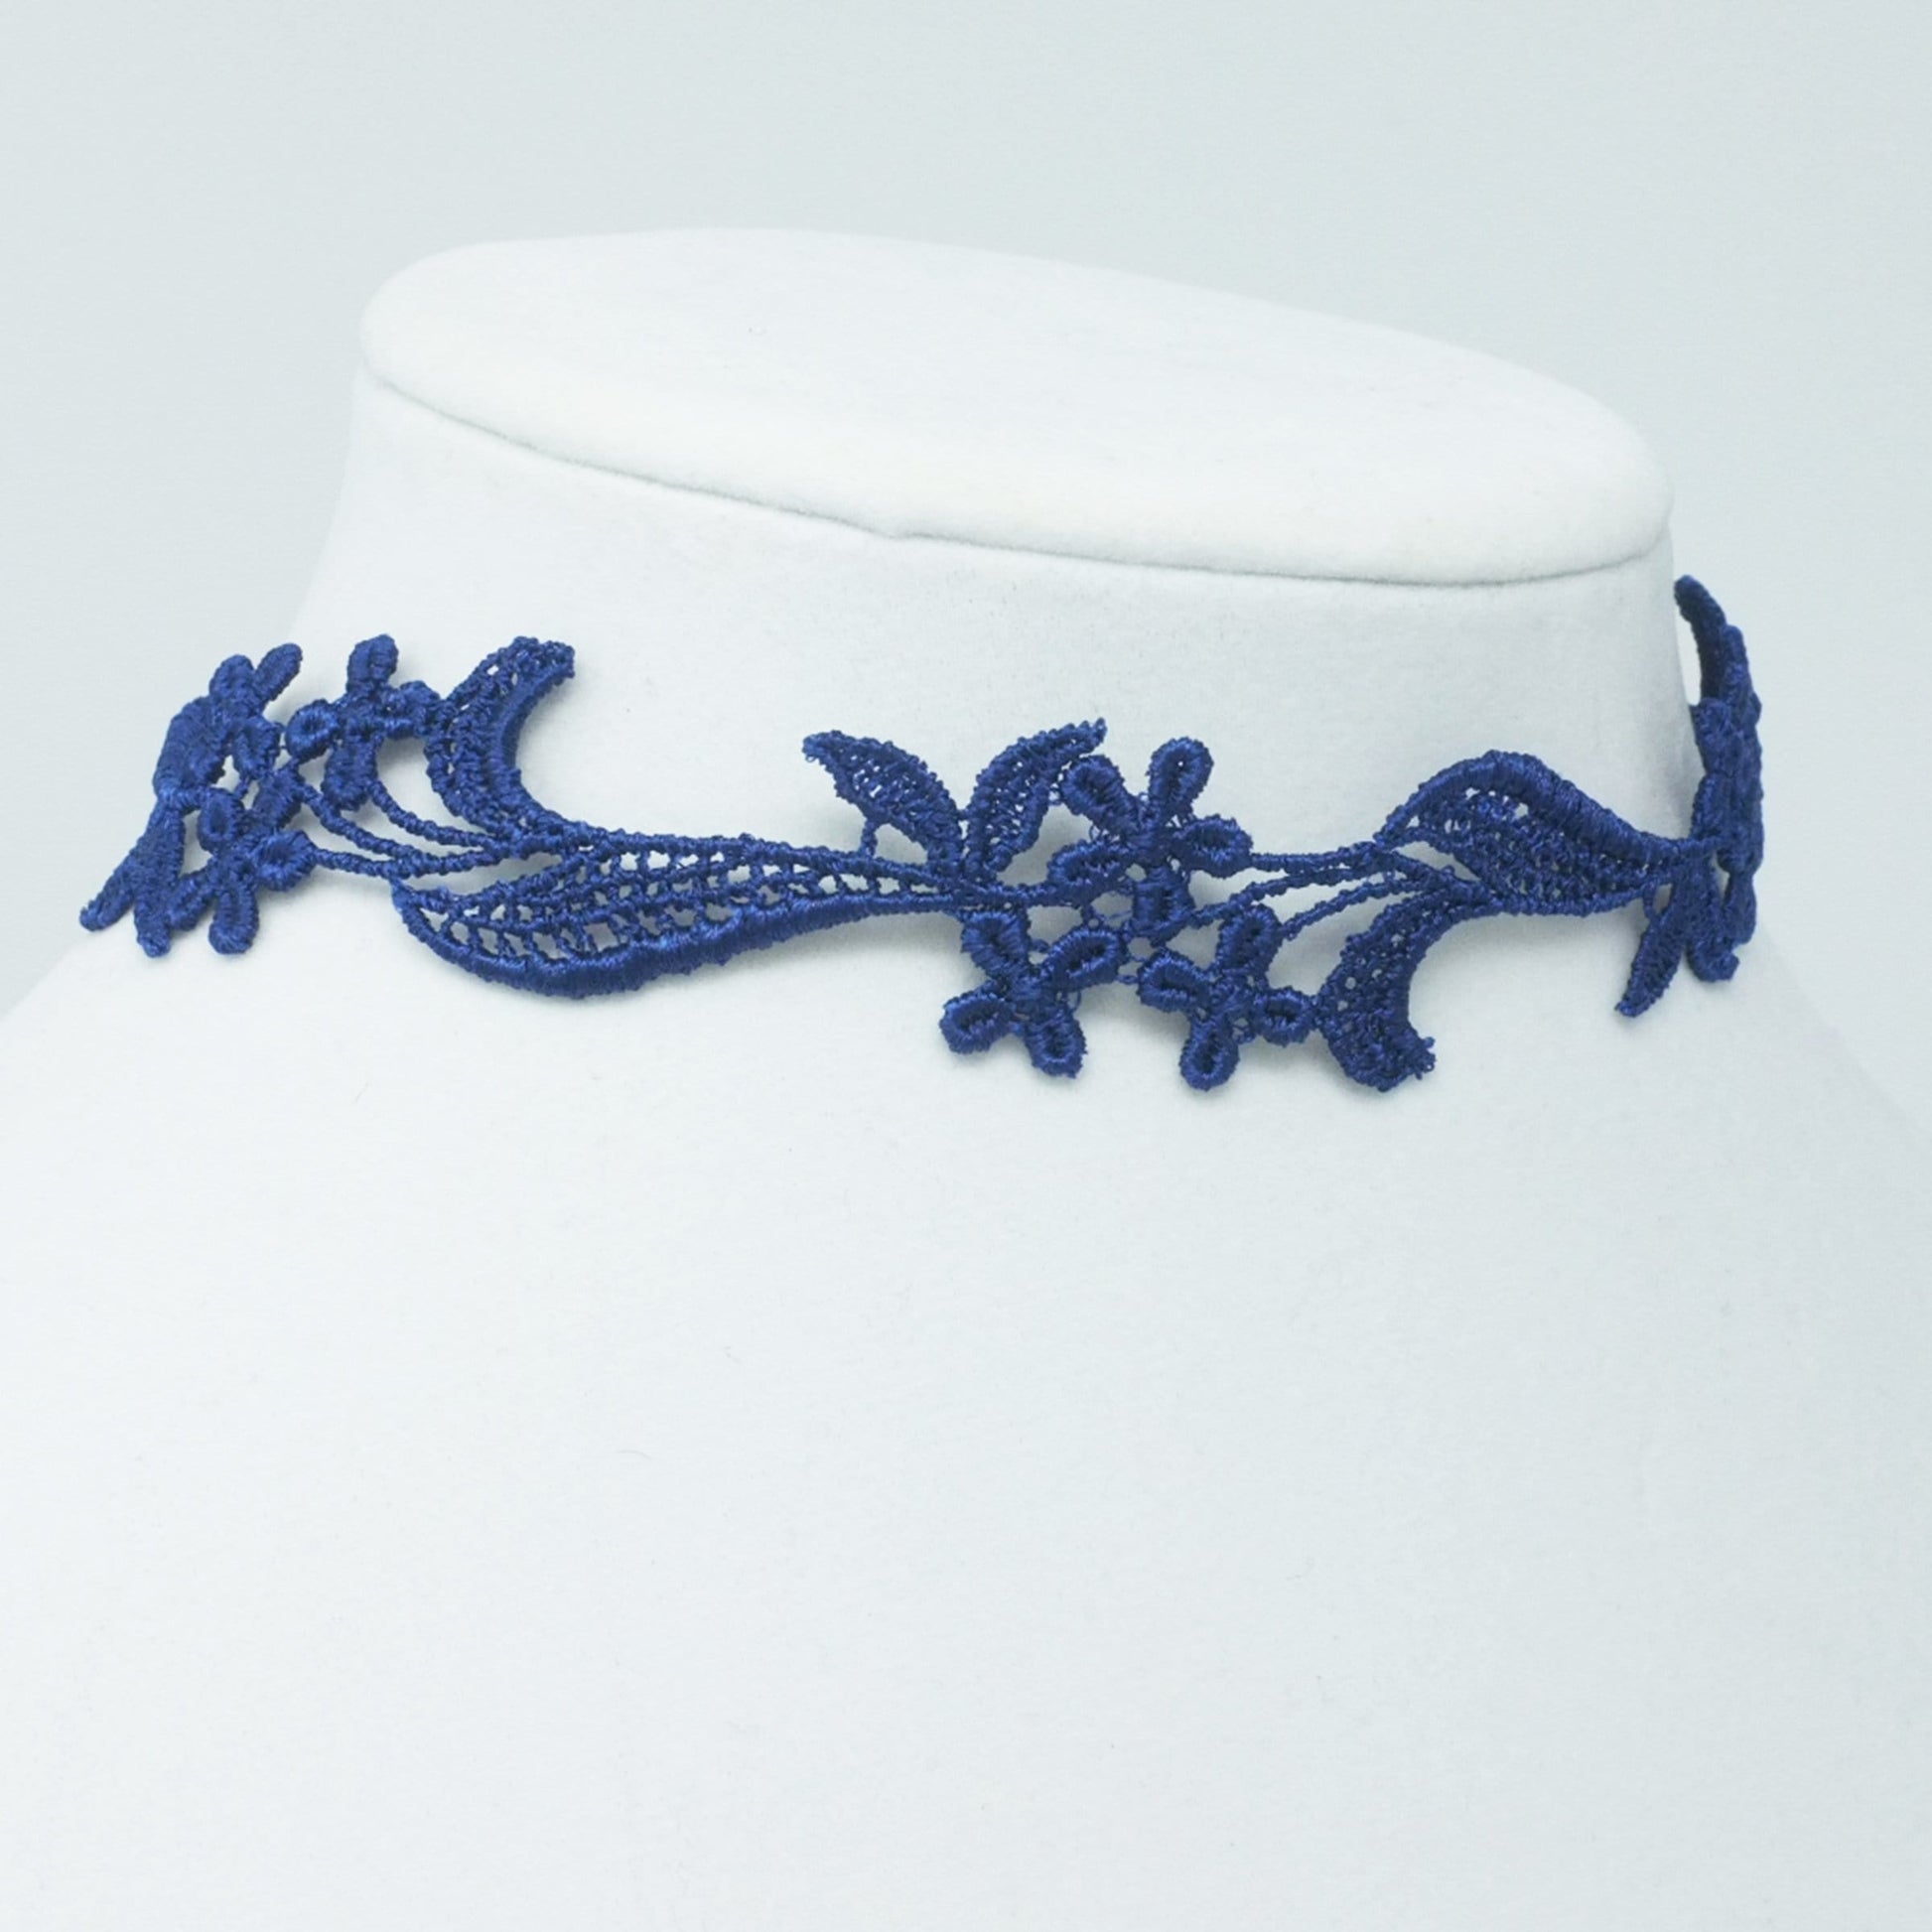 Embroidered Choker with Navy Blue floral Lace